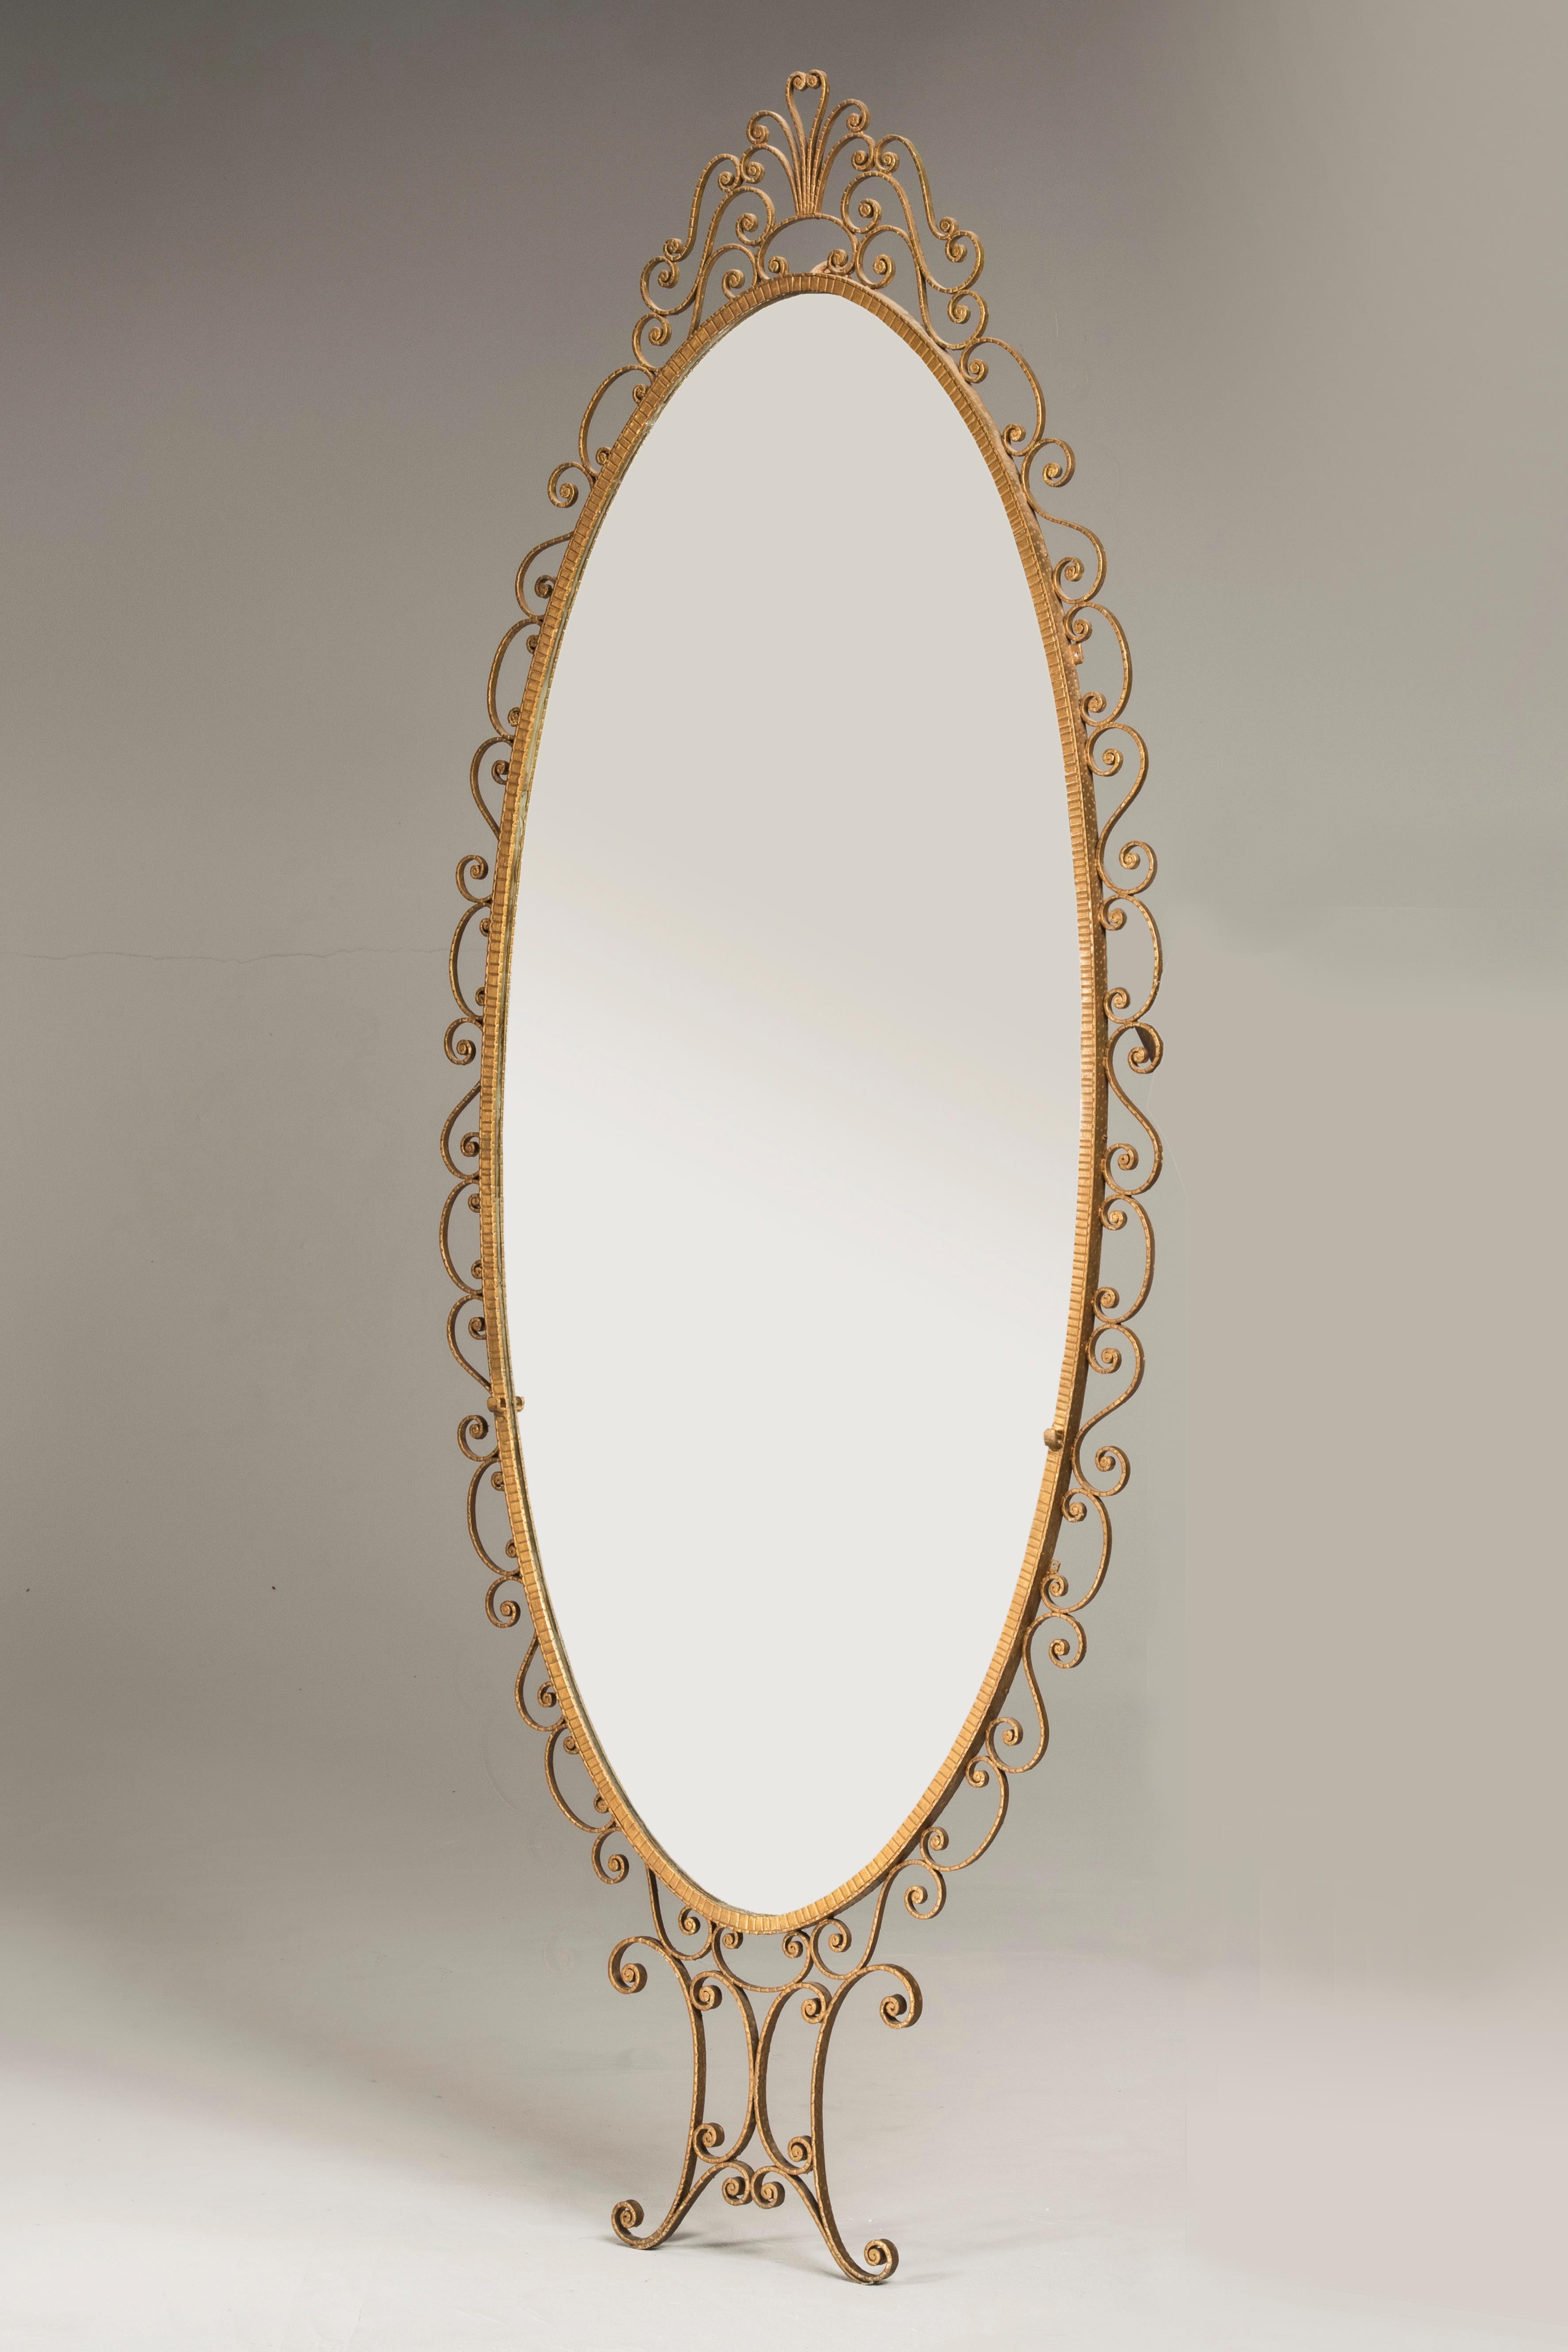 Italian midcentury pier Luigi Colli golden wrought iron oval mirror

Oval mirror with golden wrought iron frame, by Italian designer Pier Luigi Colli, Italy, 1950s. This designer was famous for his particular capability of working the iron. You